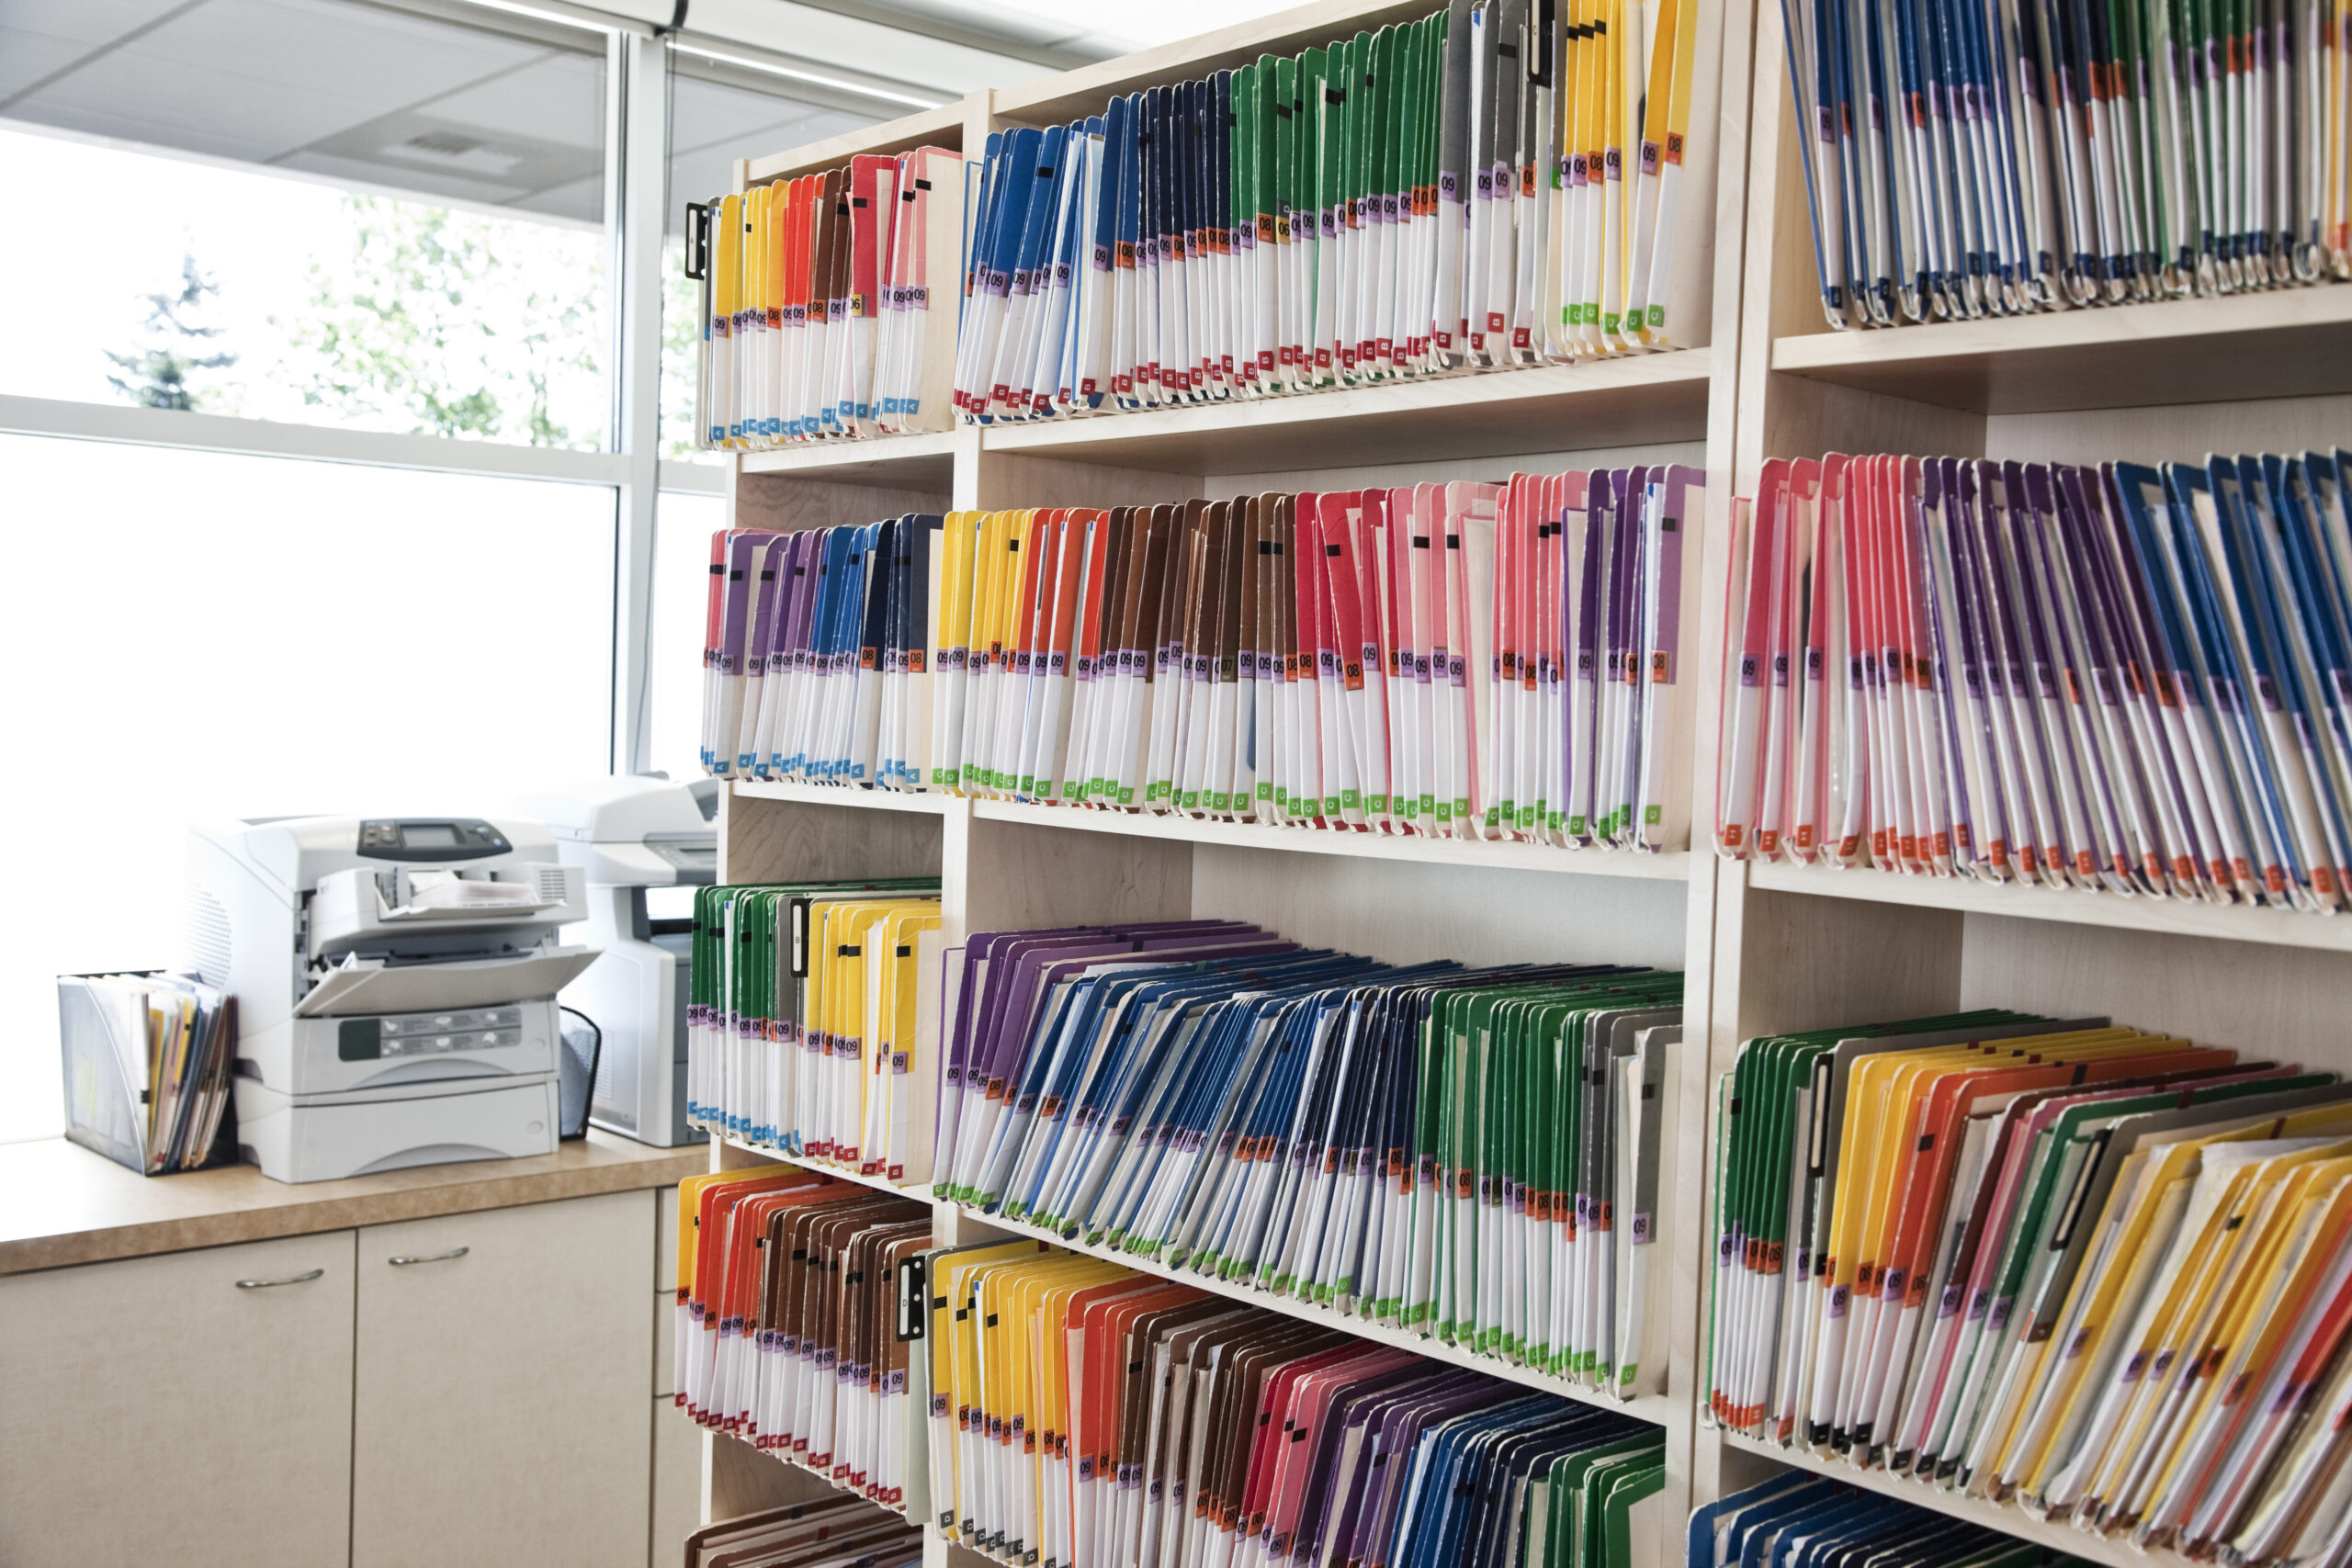 A group of colorful file folders in a dental office.